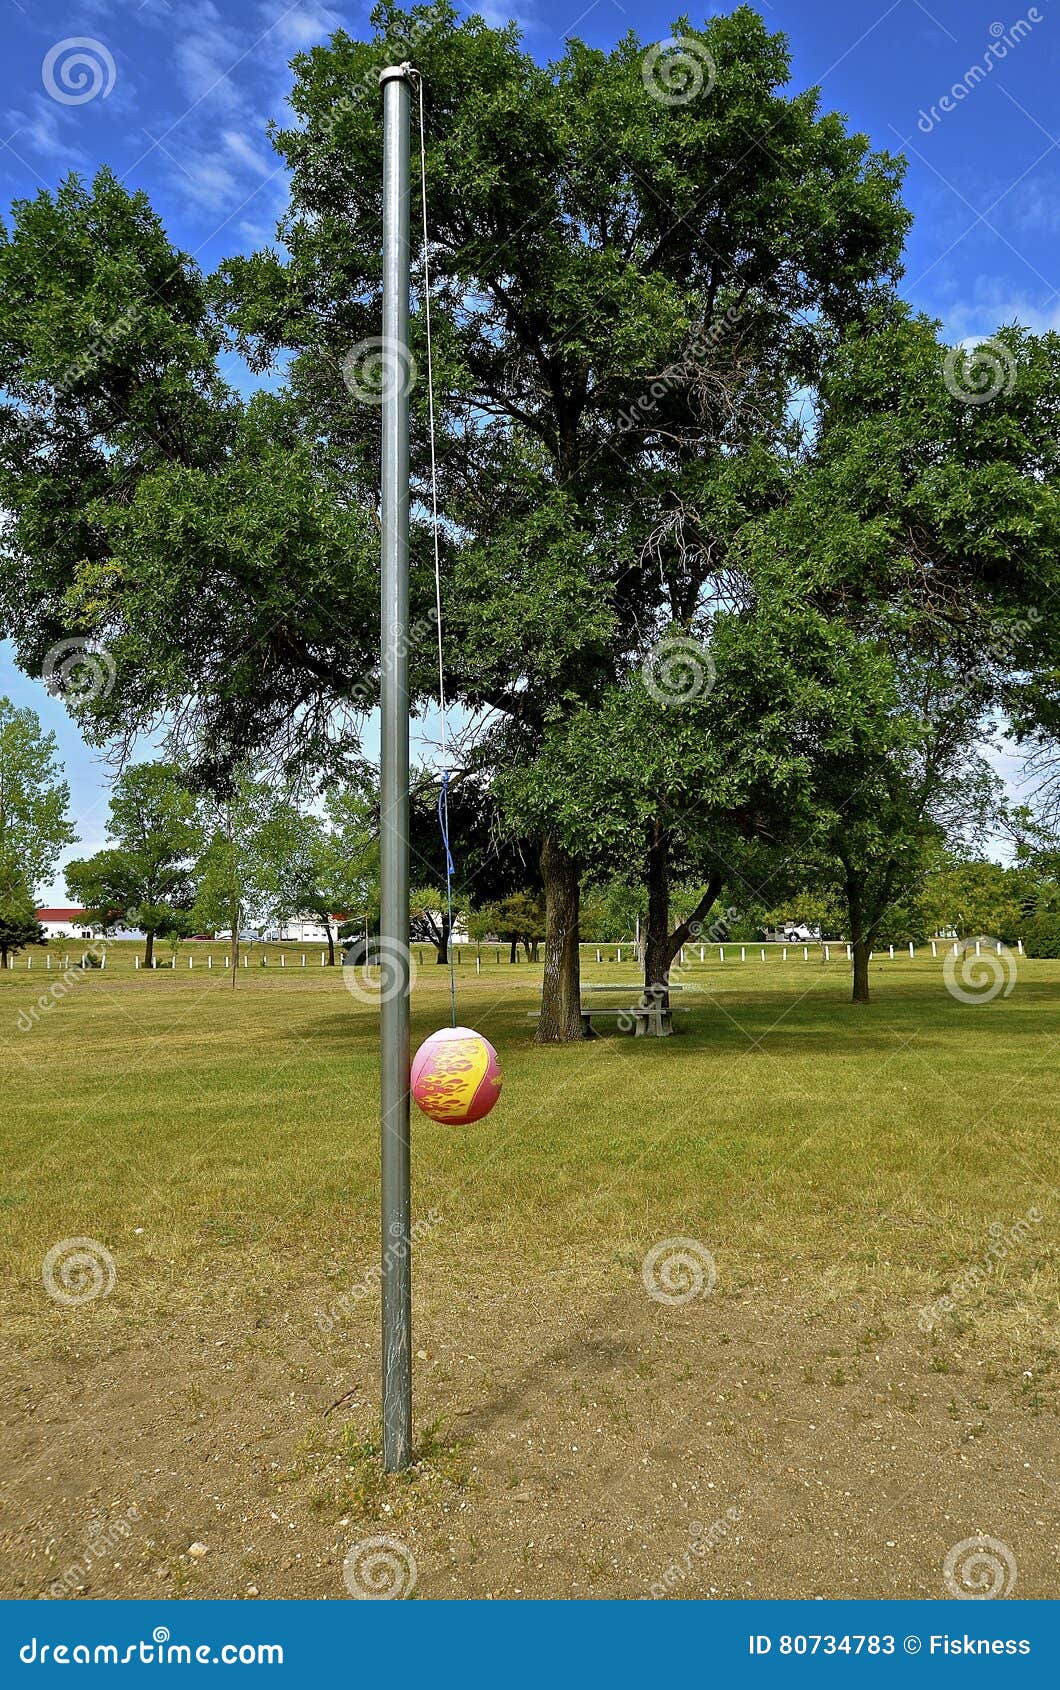 124 Tether Ball Stock Photos - Free & Royalty-Free Stock Photos from  Dreamstime